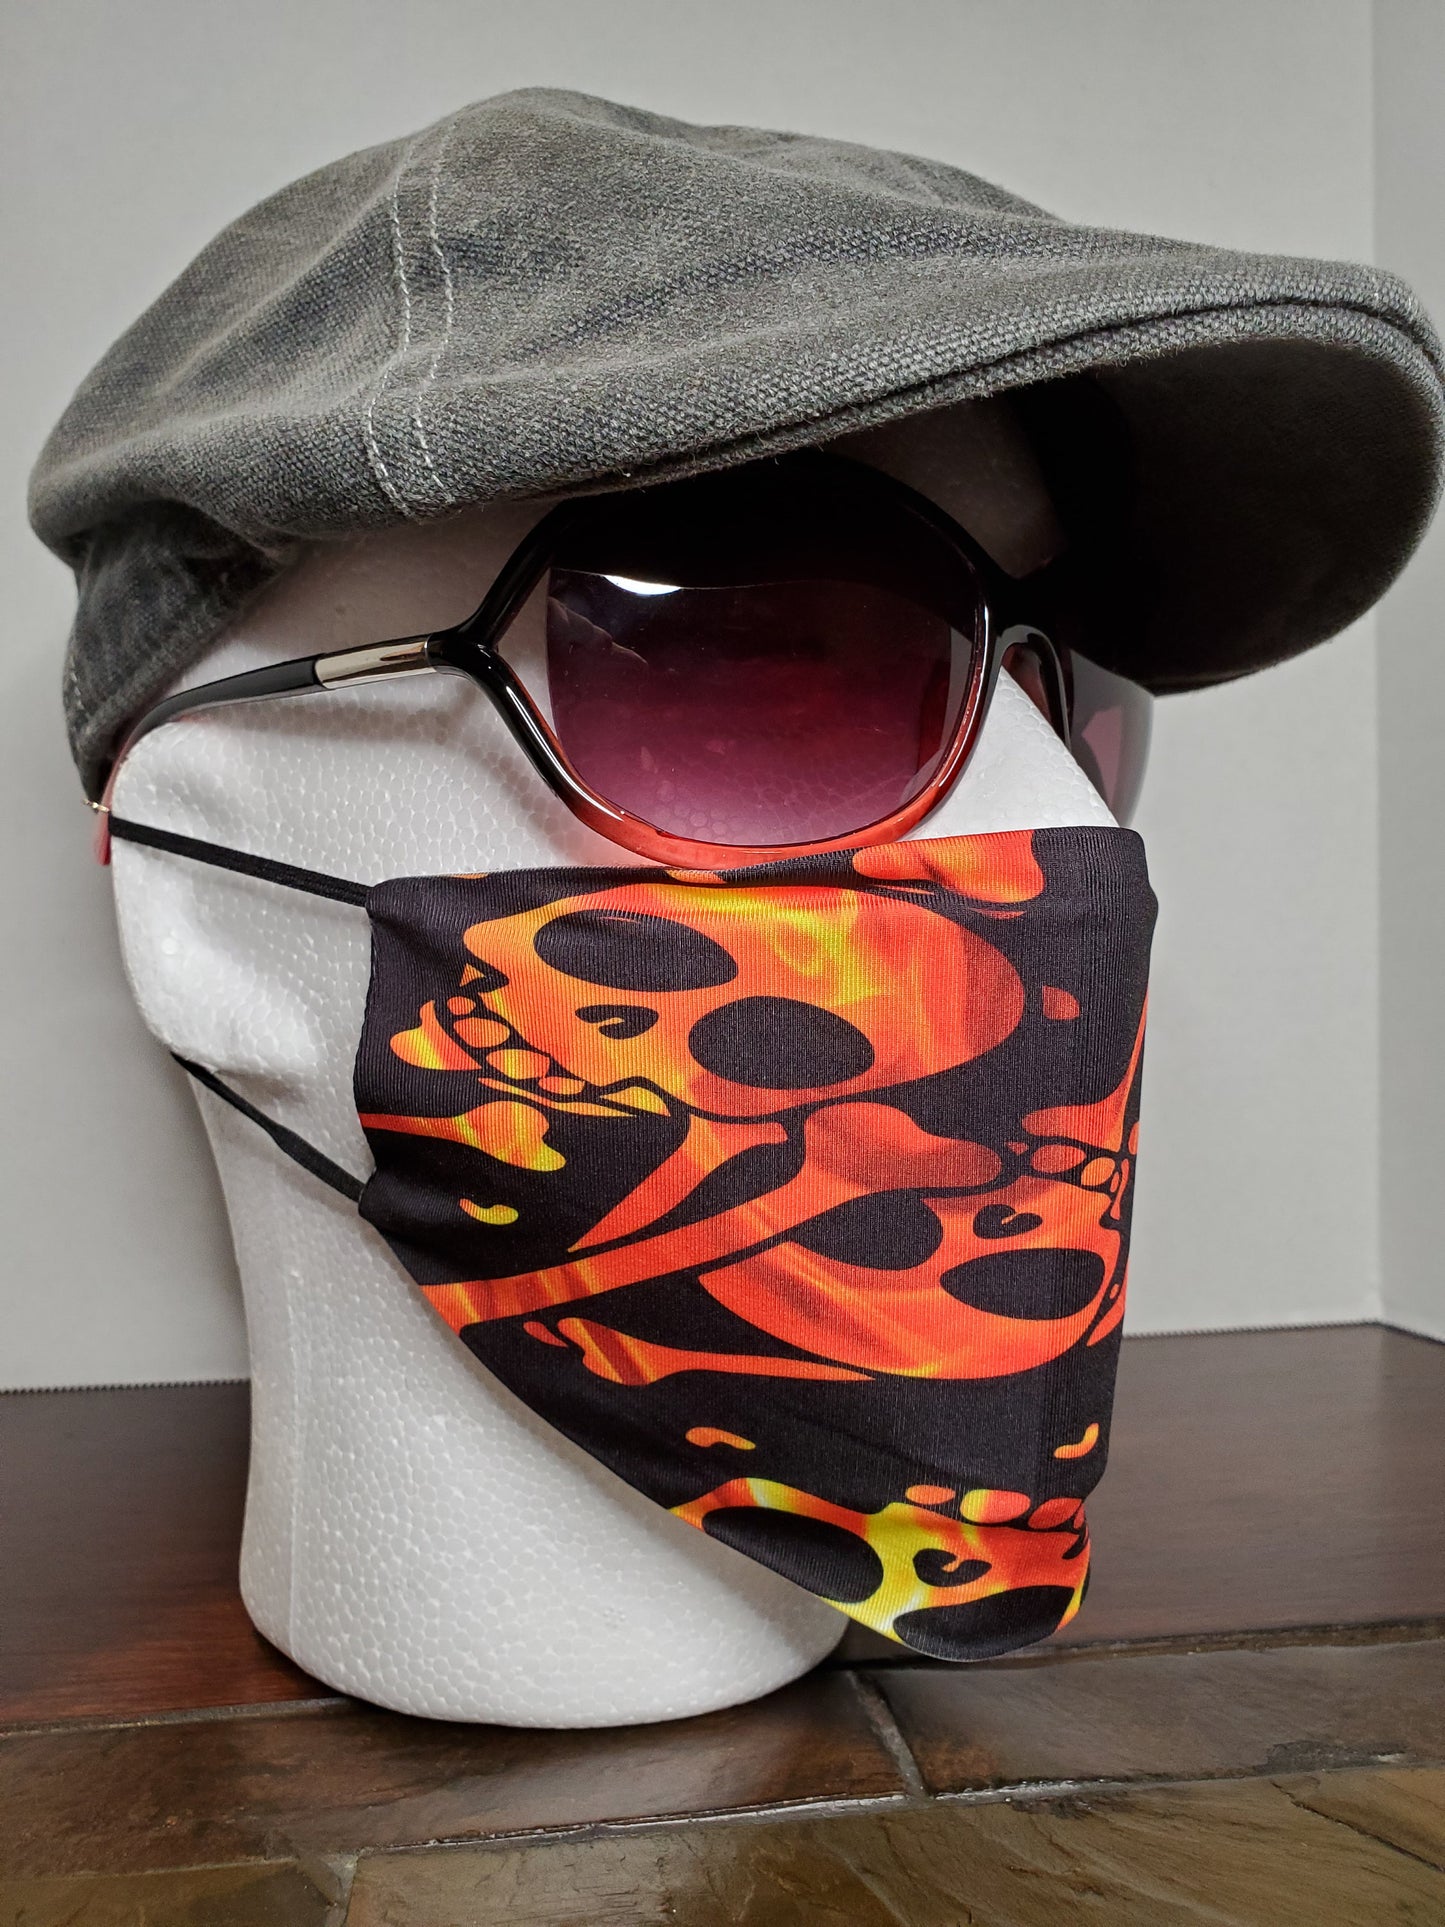 Fire Skull Face Cover, Carbon Filter, Adjustable Ear Clips, 2 Layer Mask, Breathable & Washable, Personalized Available, Coffee Mug Option